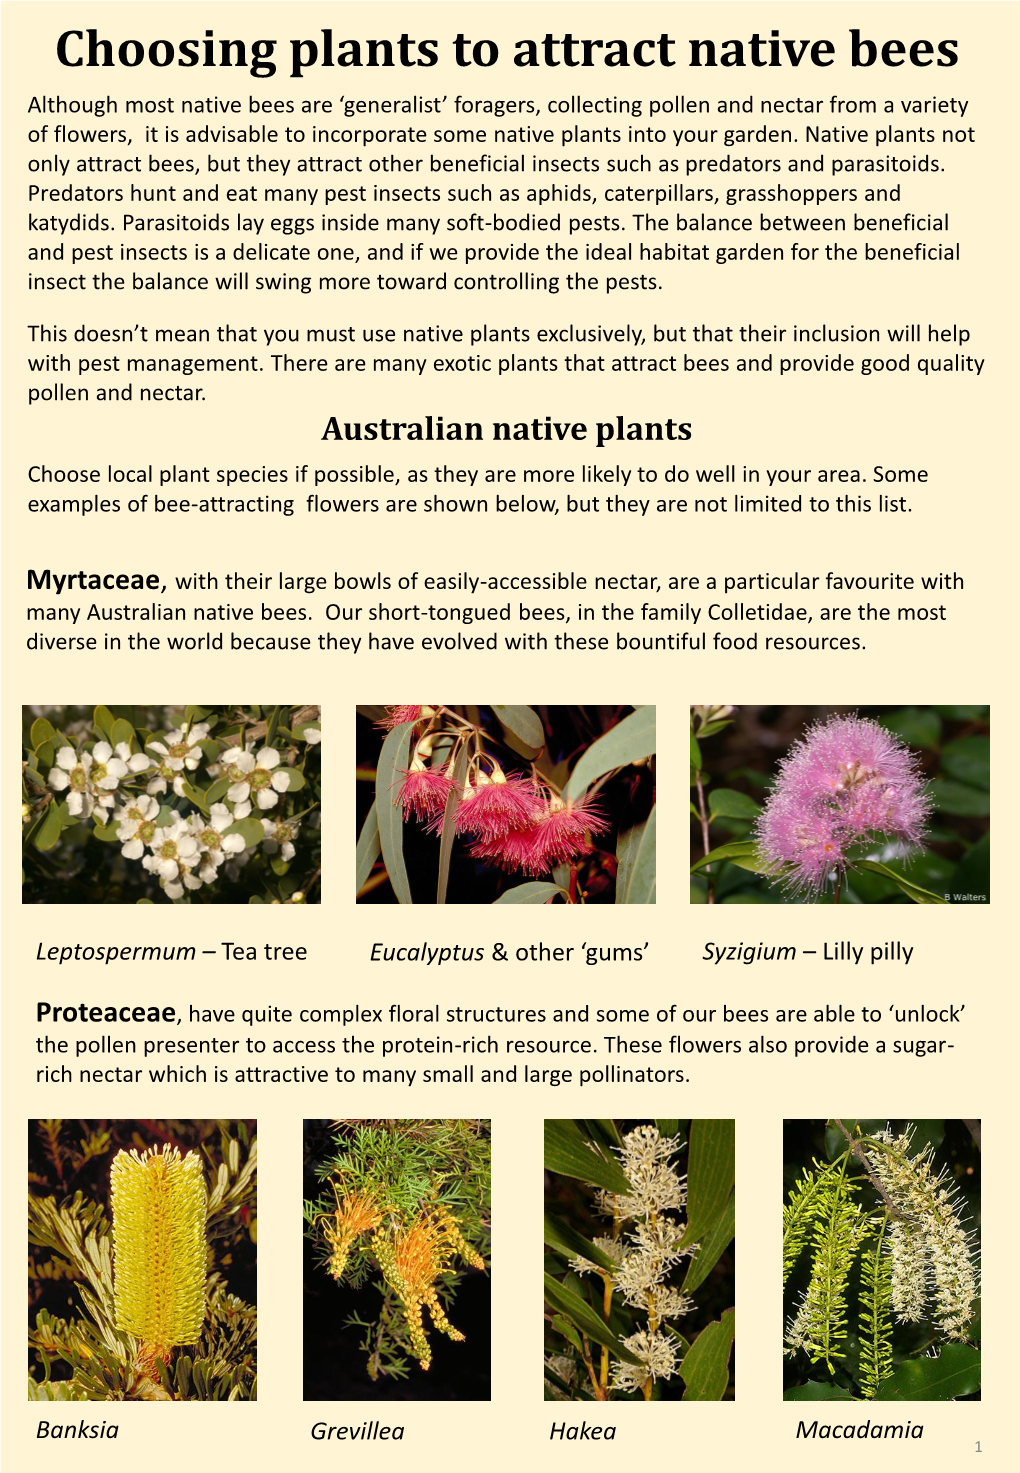 Choosing Plants to Attract Native Bees